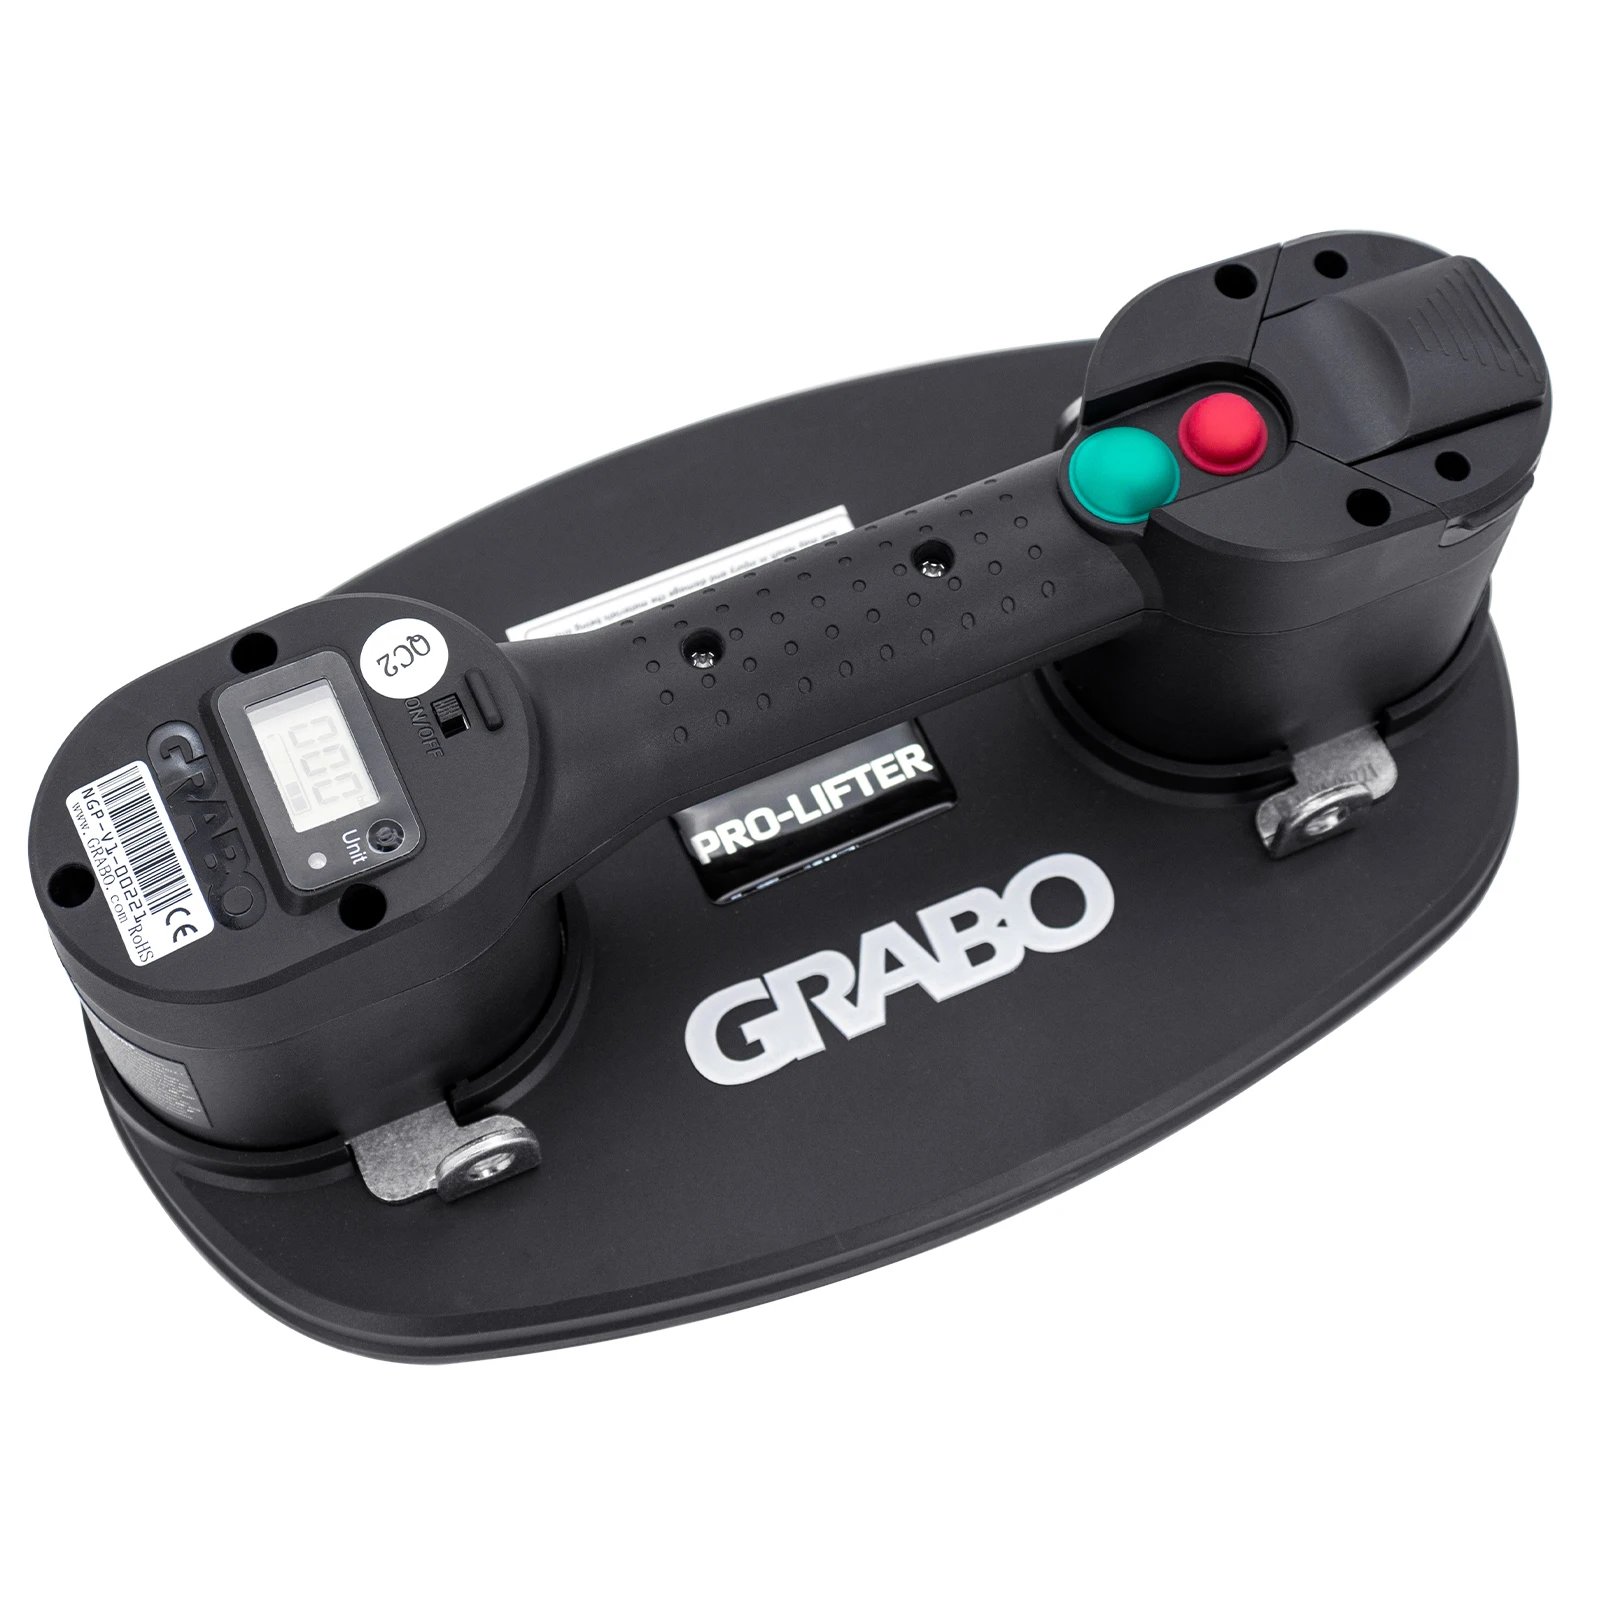 

Grabo Pro Electric Vacuum Suction Cup Lifter with Automatic Turn On/Off Pump Function Digital Display Electronic Pressure Gauge